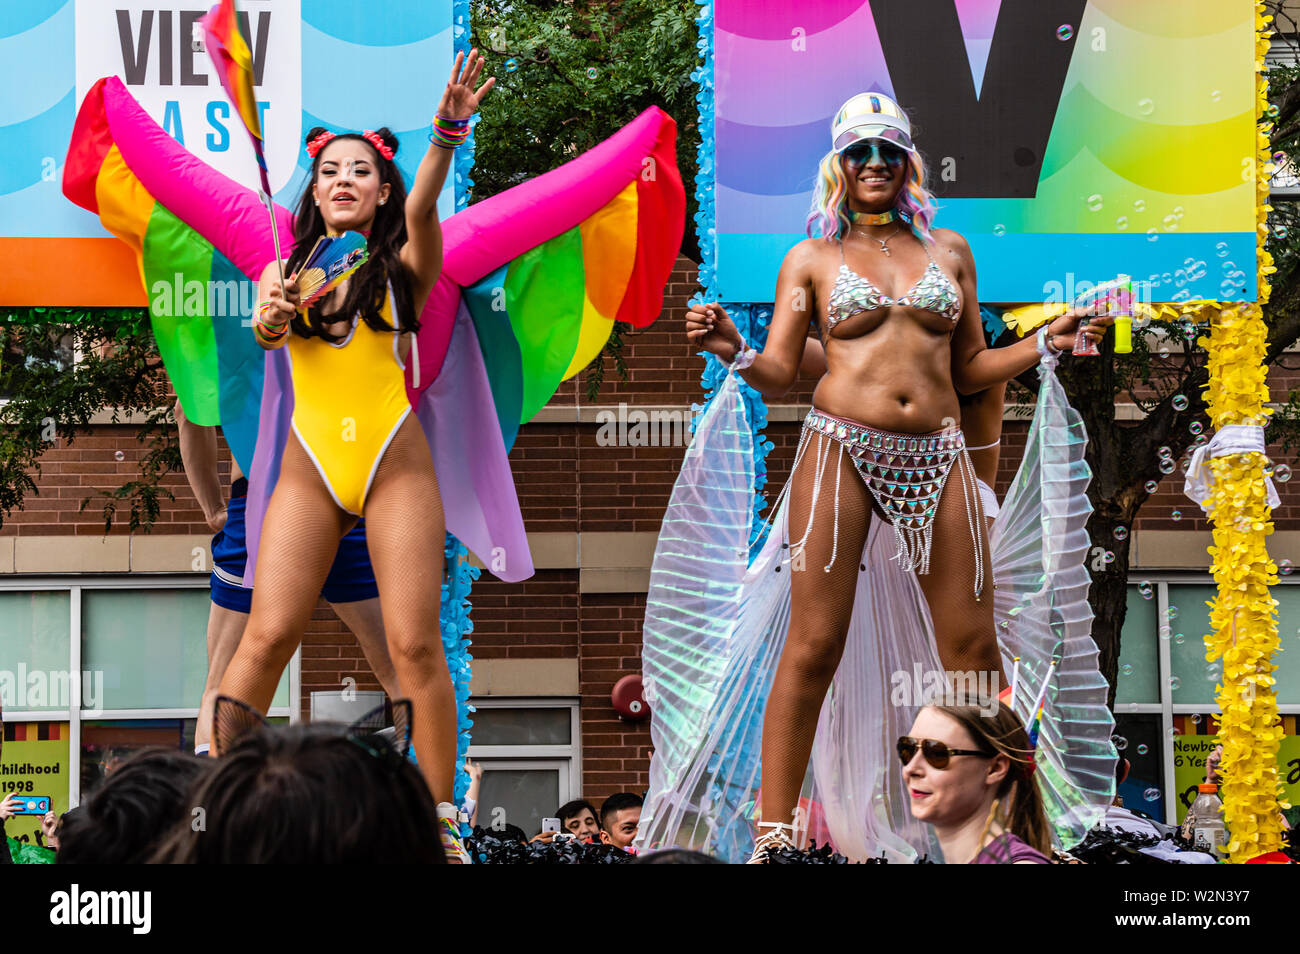 Lakeview, Chicago-June 30, 2019: Transgender and cisgender individuals performing at the Gay Pride parade. Stock Photo